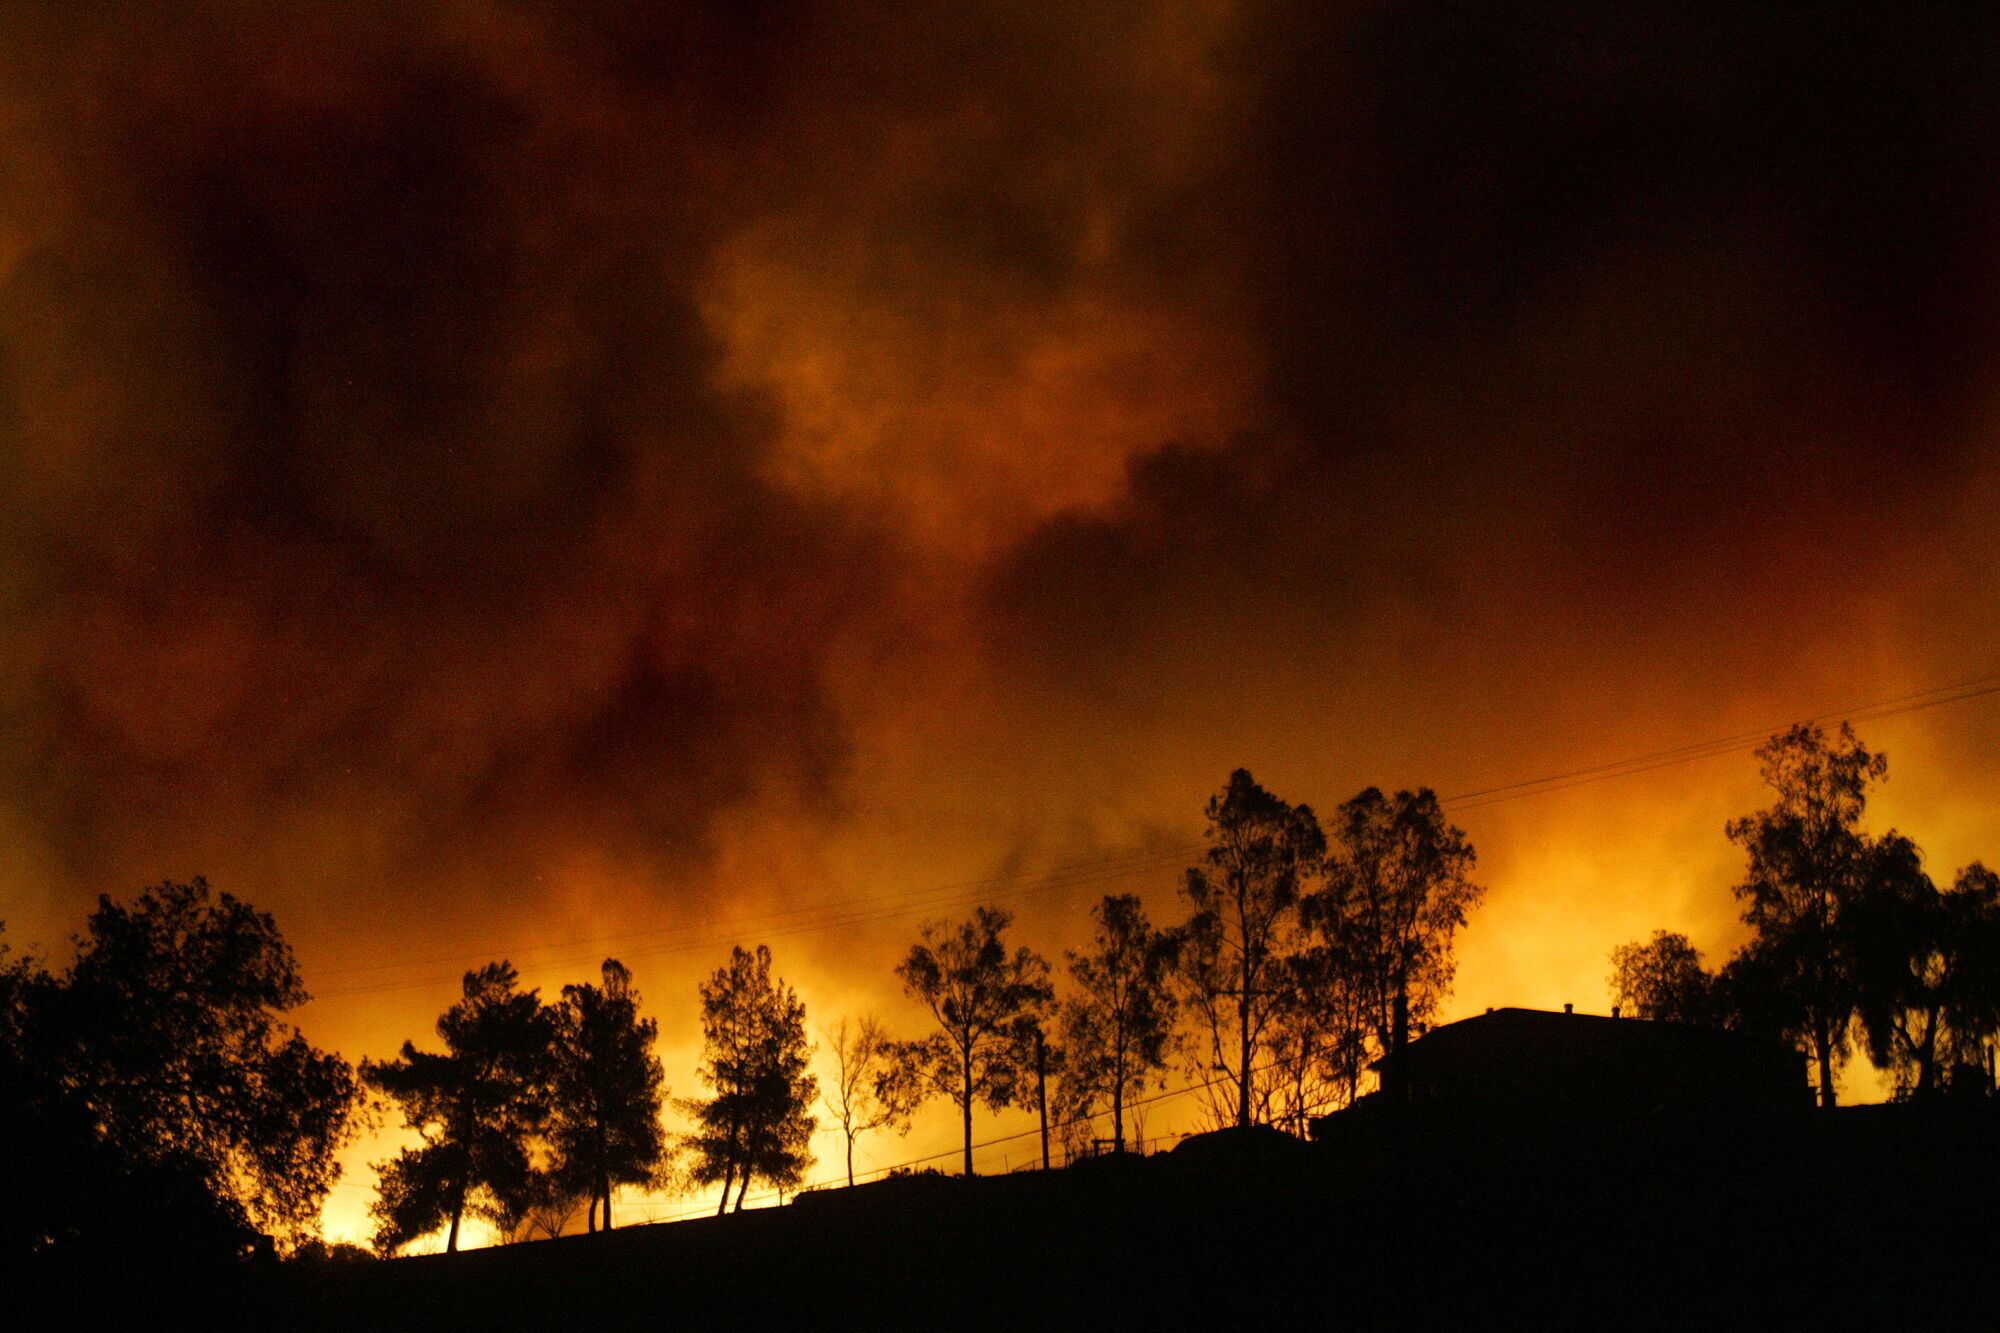 The night glows with flames near Dulzura during the 2007 Harris fire.